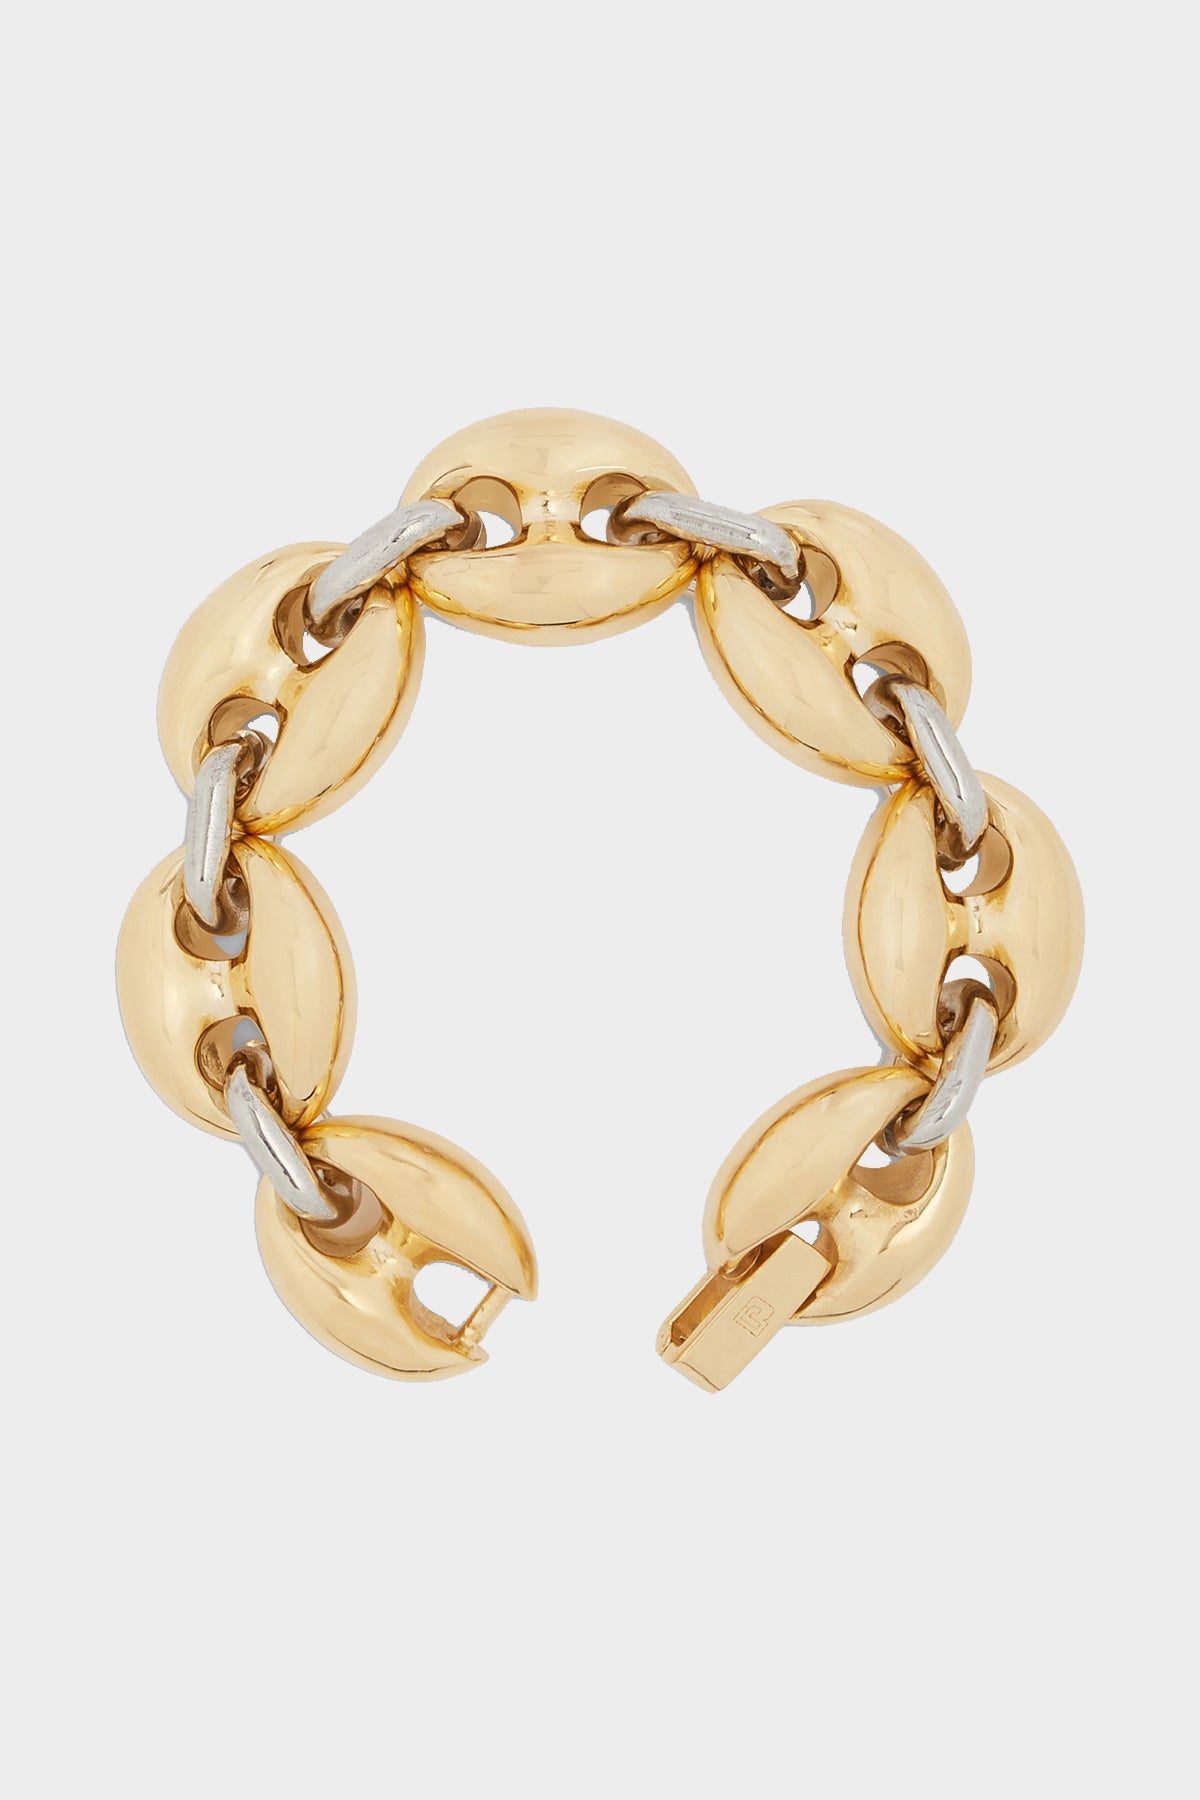 Eight Chunky Bracelet in Silver Gold - shop-olivia.com